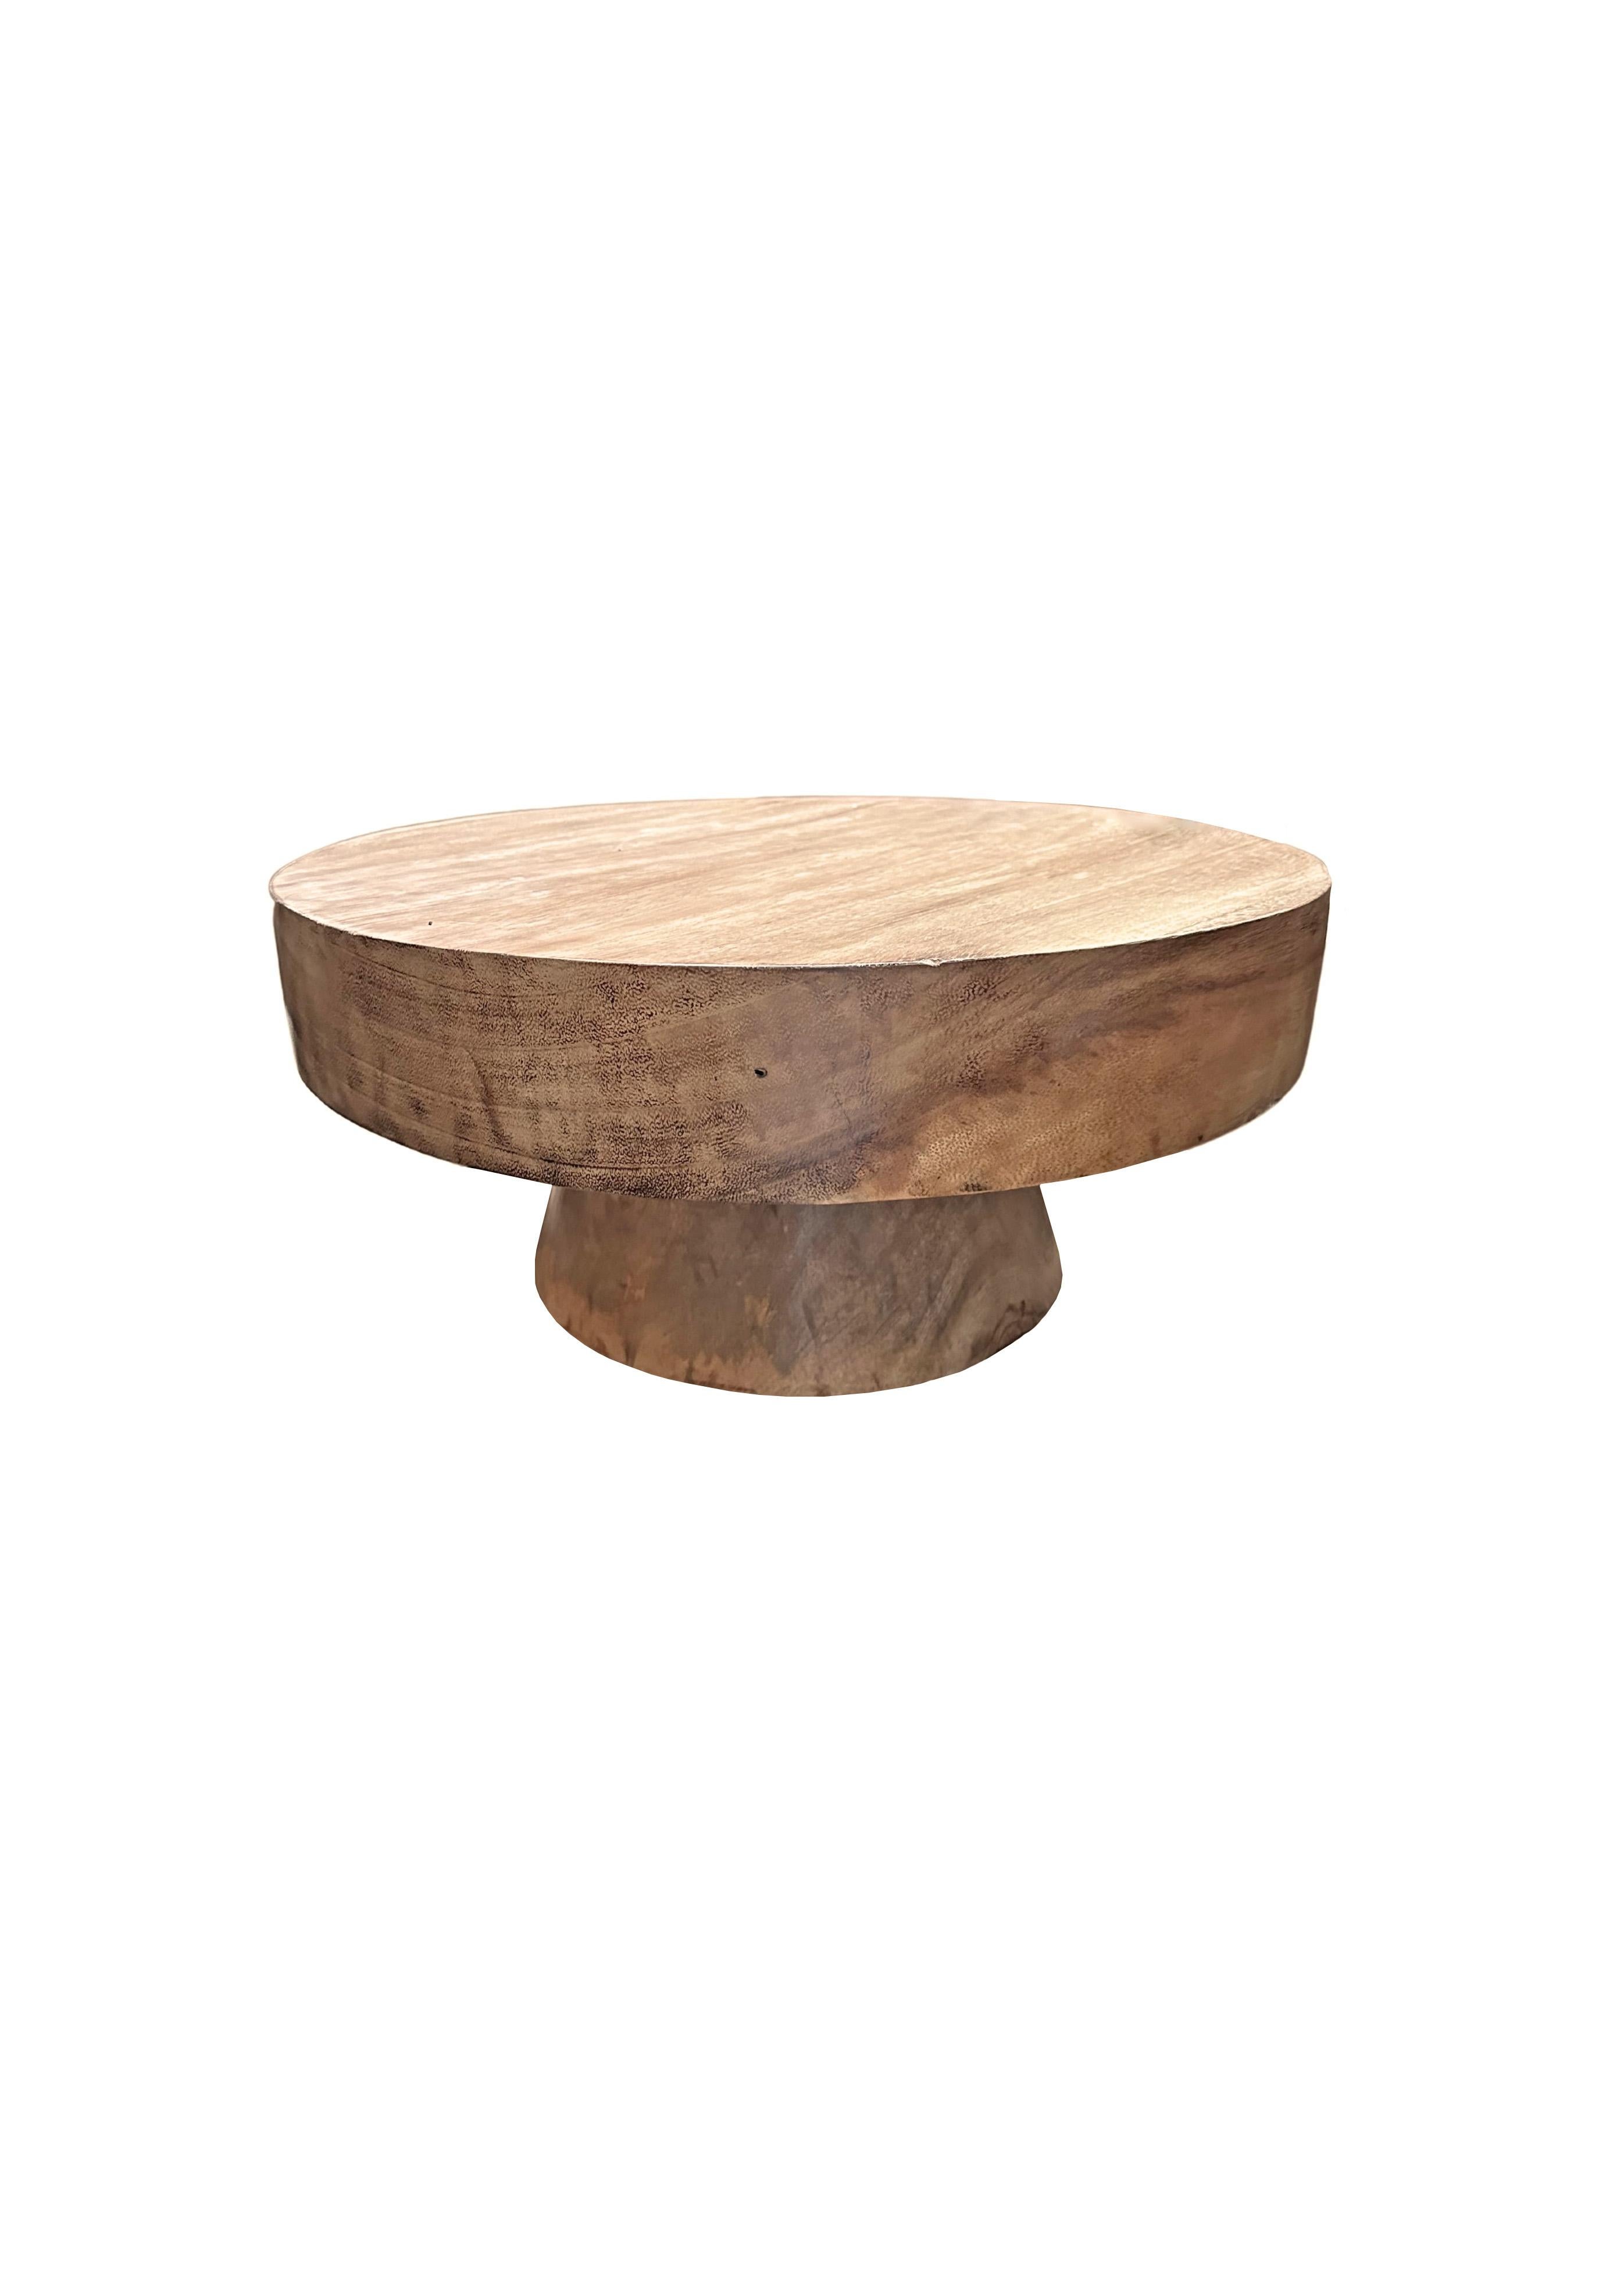 A wonderfully sculptural round side table featuring a natural finish. Its neutral pigment and subtle wood texture makes it perfect for any space. This table was crafted from mango wood and has a smooth texture. 

 